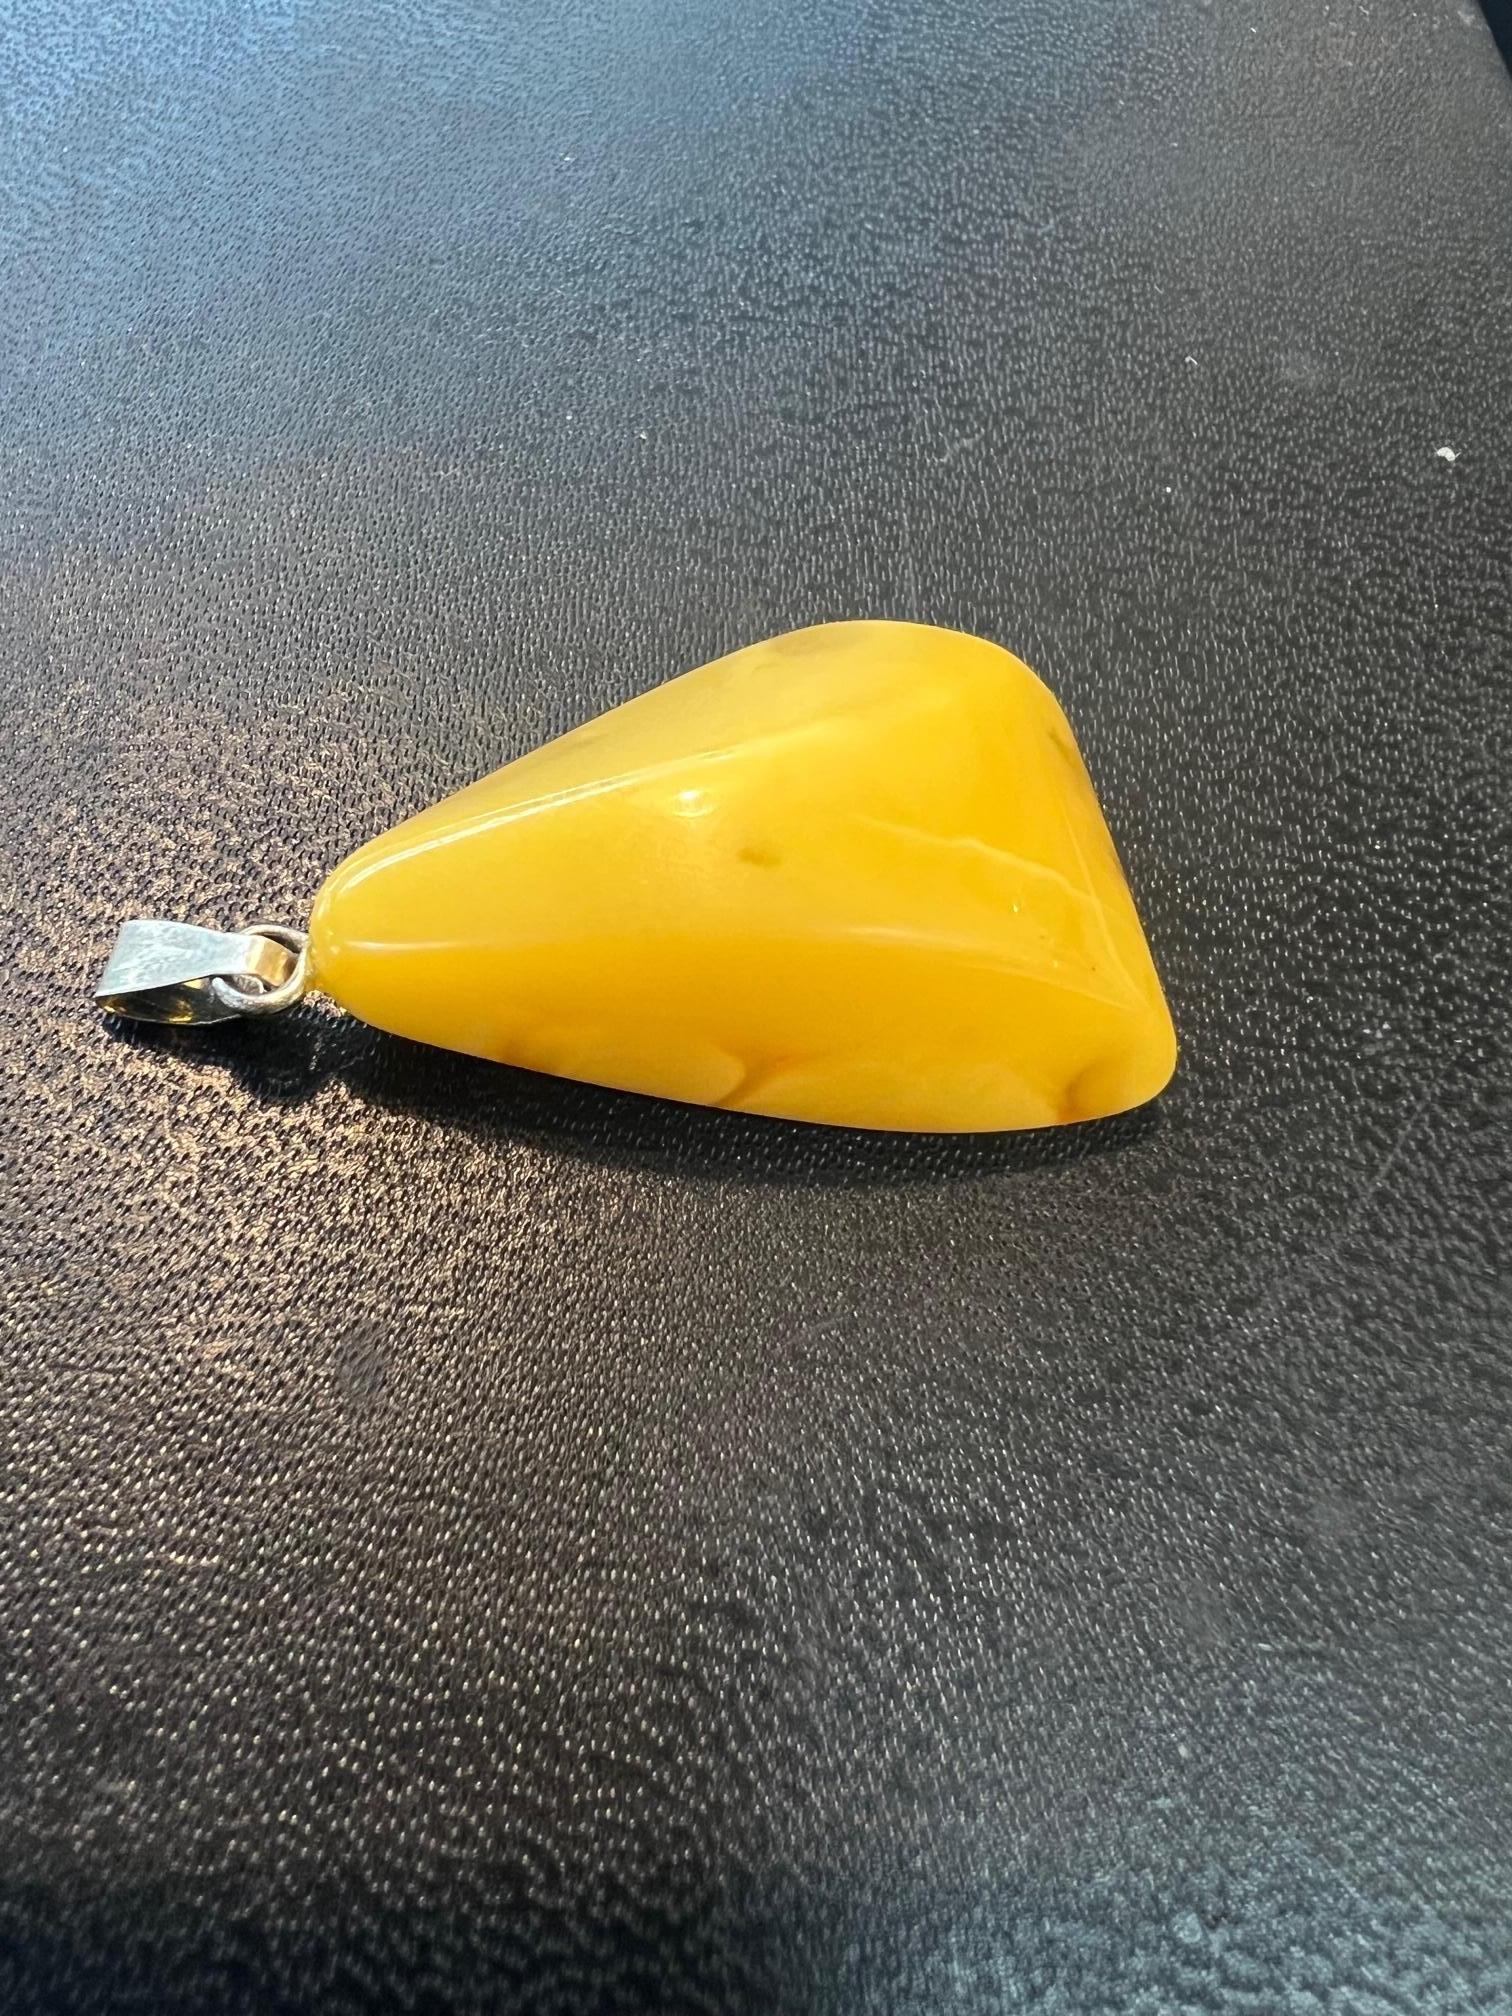 Cabochon Yellow Baltic Amber Pendant from Latvia For Sale